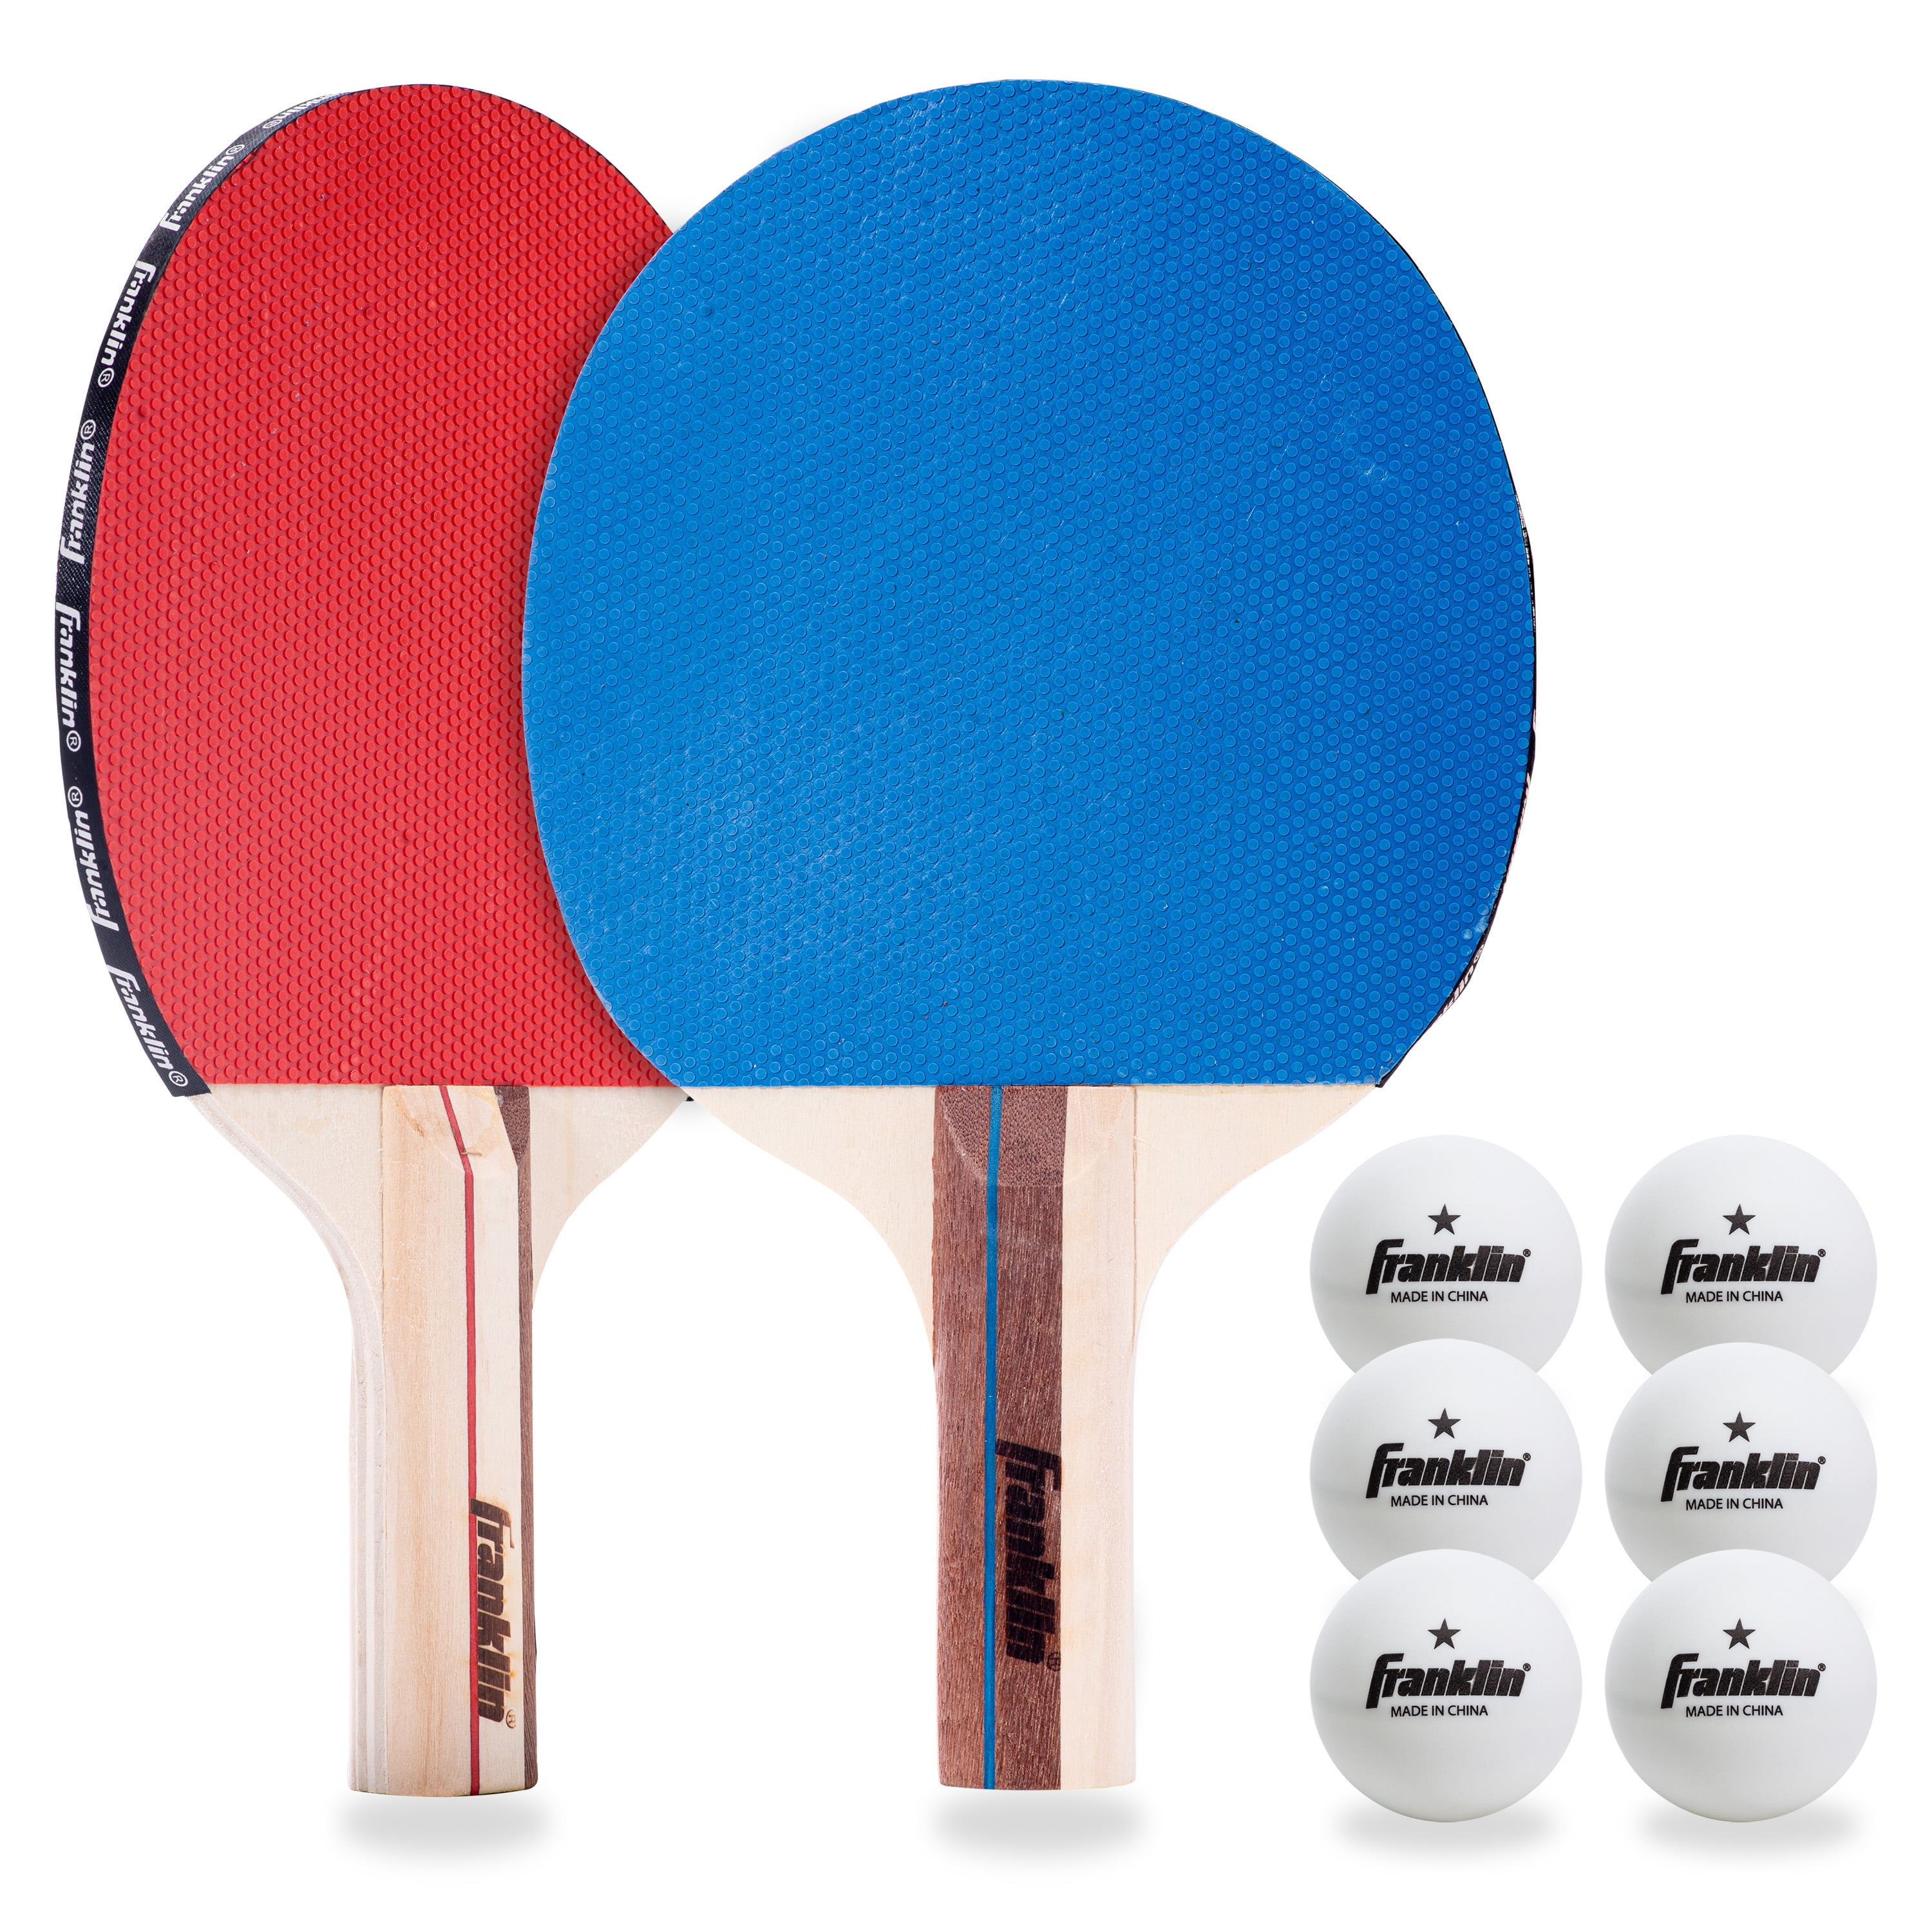 Pro Wood Paddles and 8 Light Regulation Table Tennis Ping Pong Paddle Set of 4 